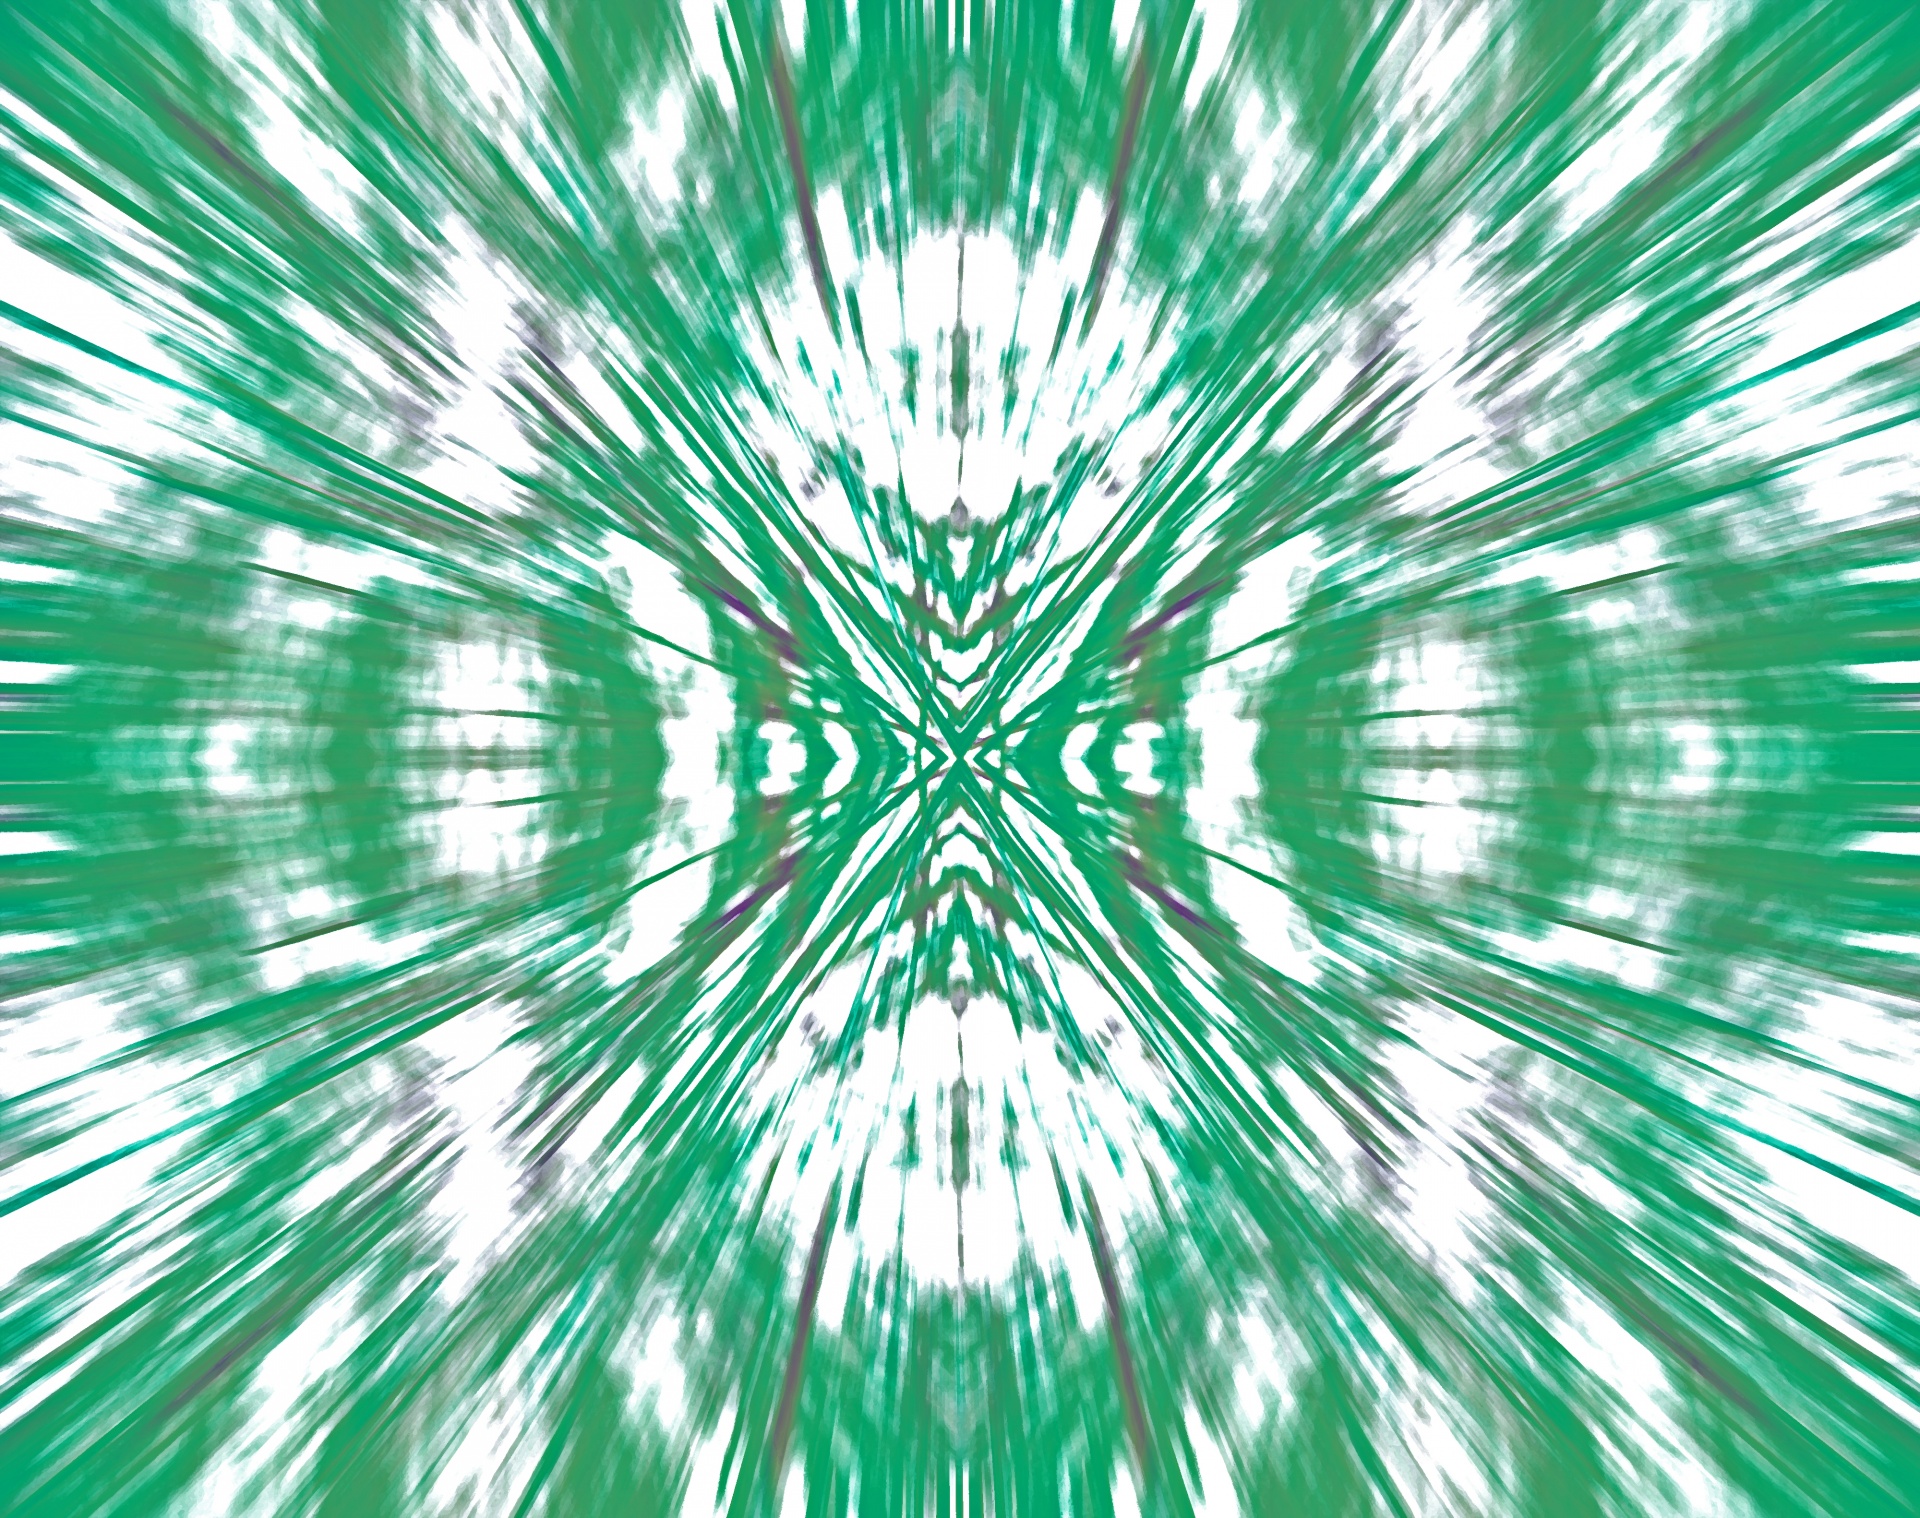 Green And White Zoom Burst Effect